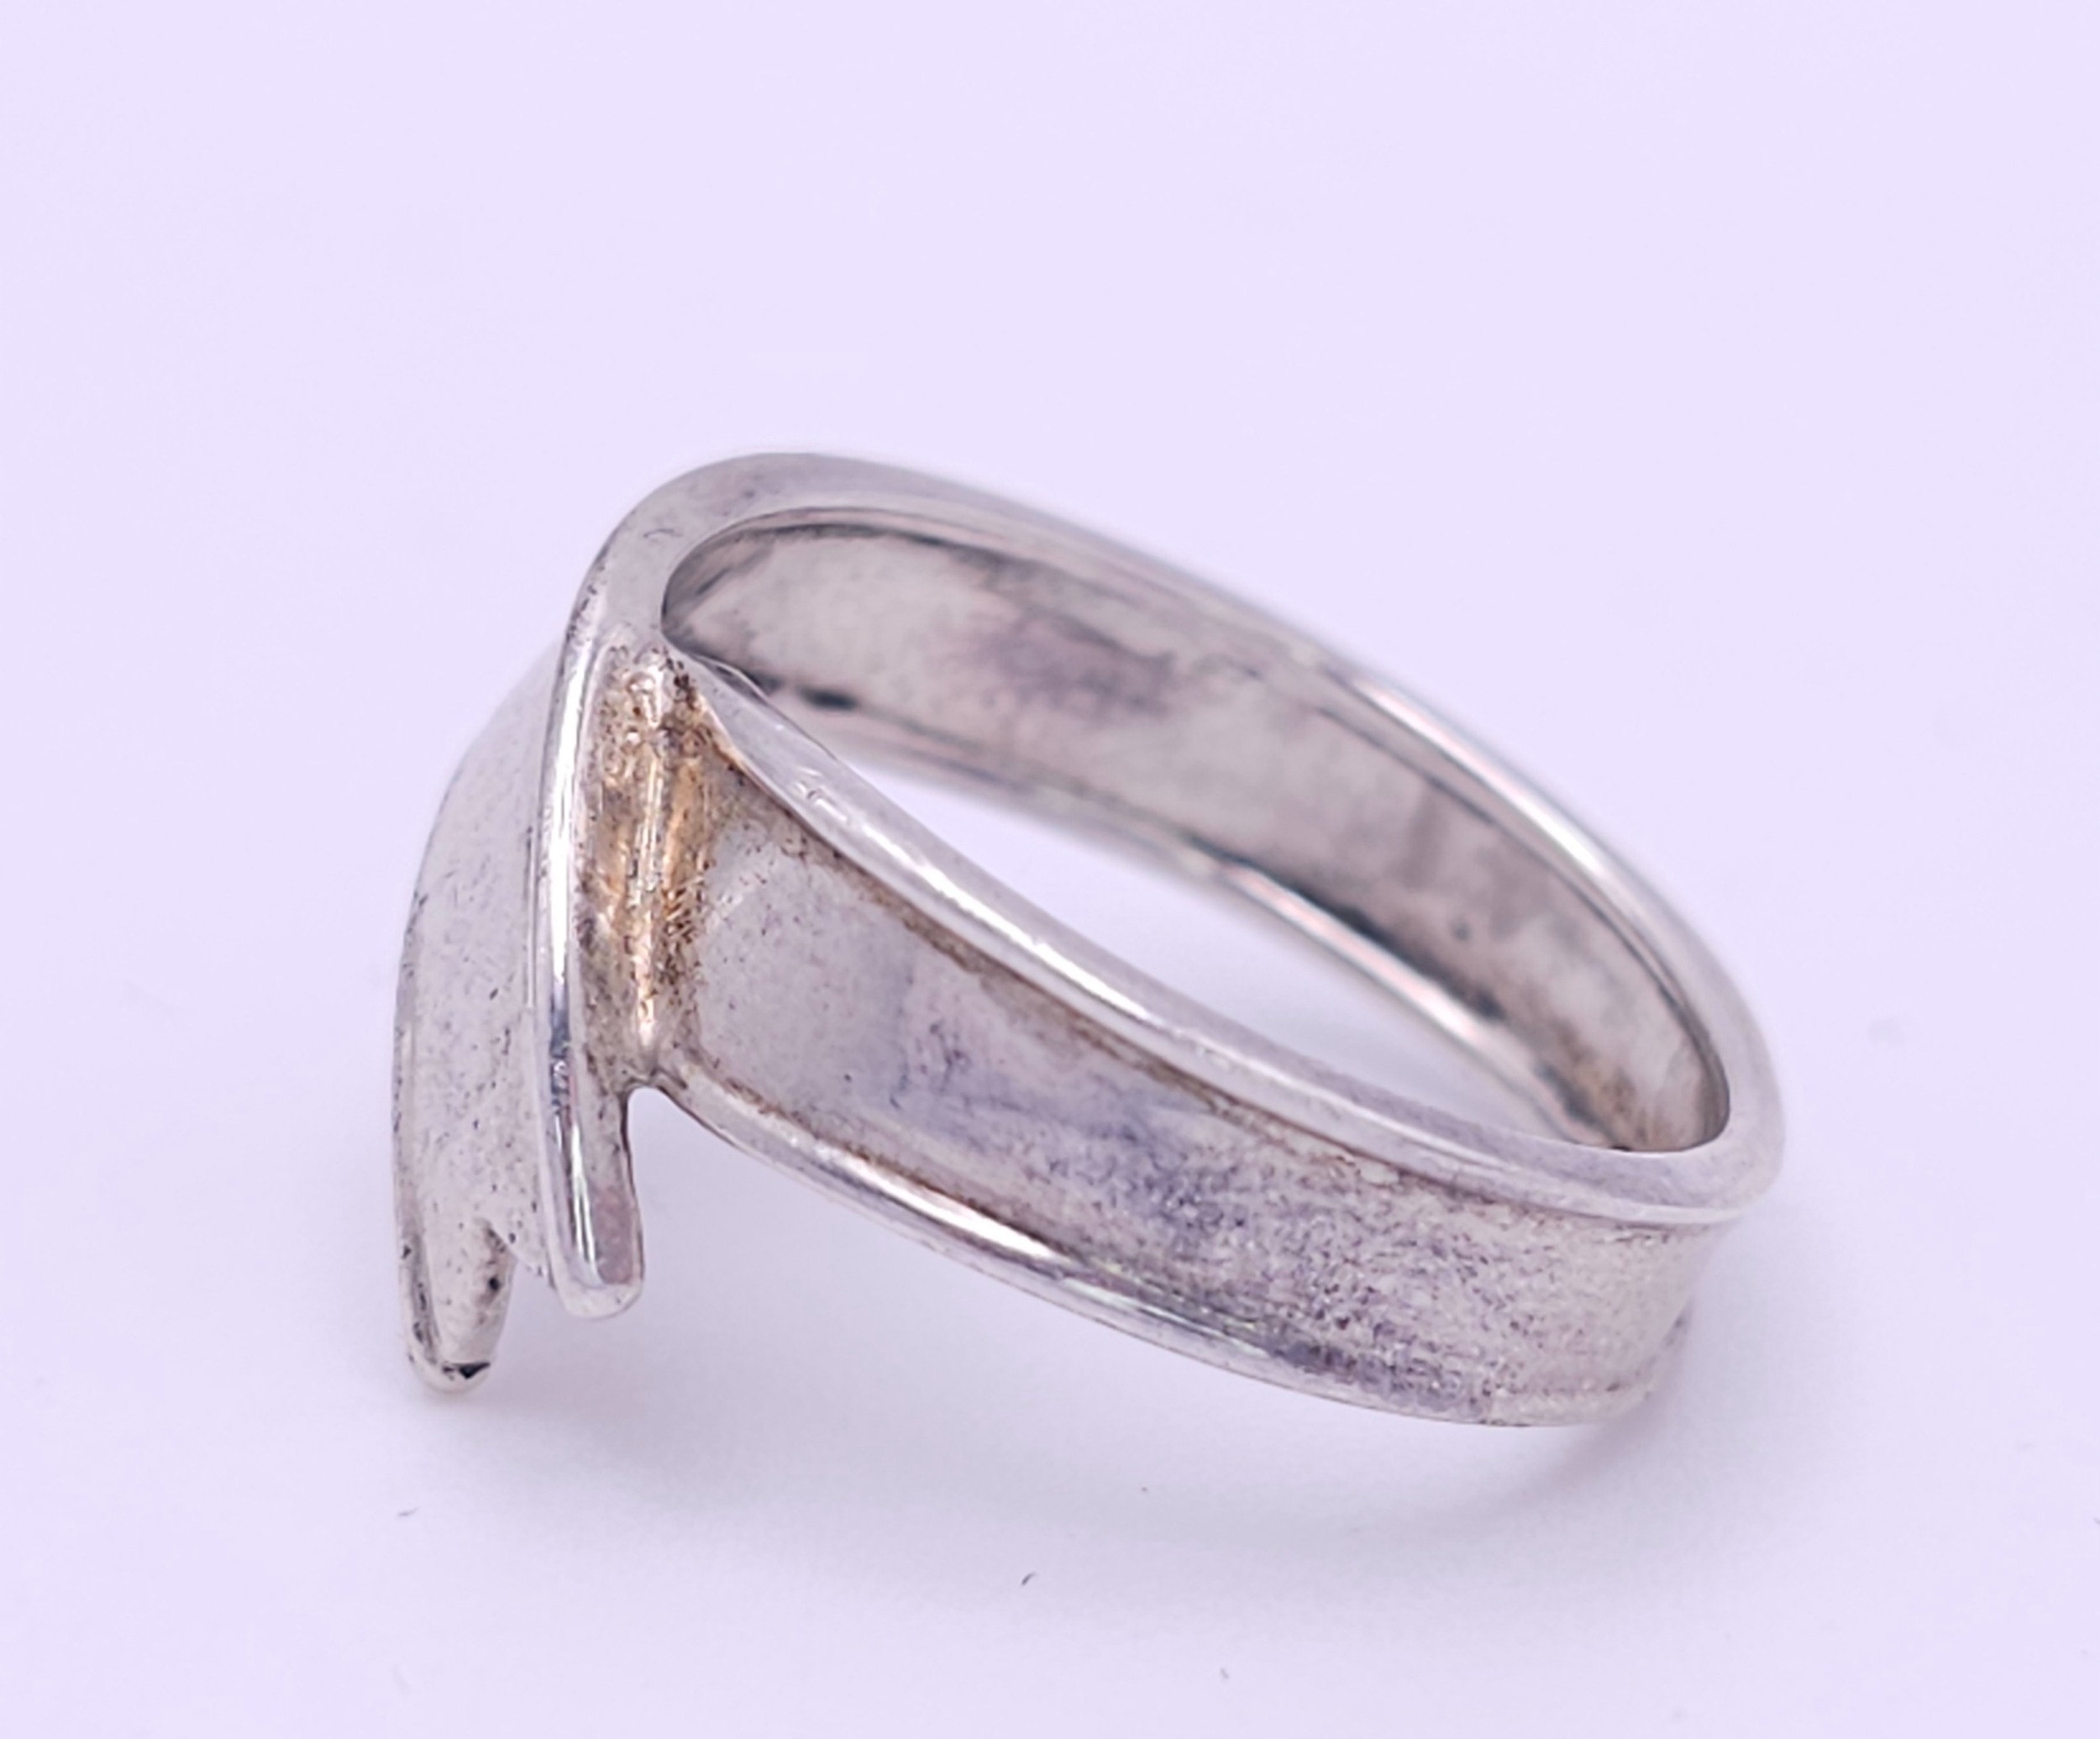 A TIFFANY & CO STERLING SILVER RIBBON RING. Size J, 3.4g weight. Ref: SC 8097 - Image 3 of 6